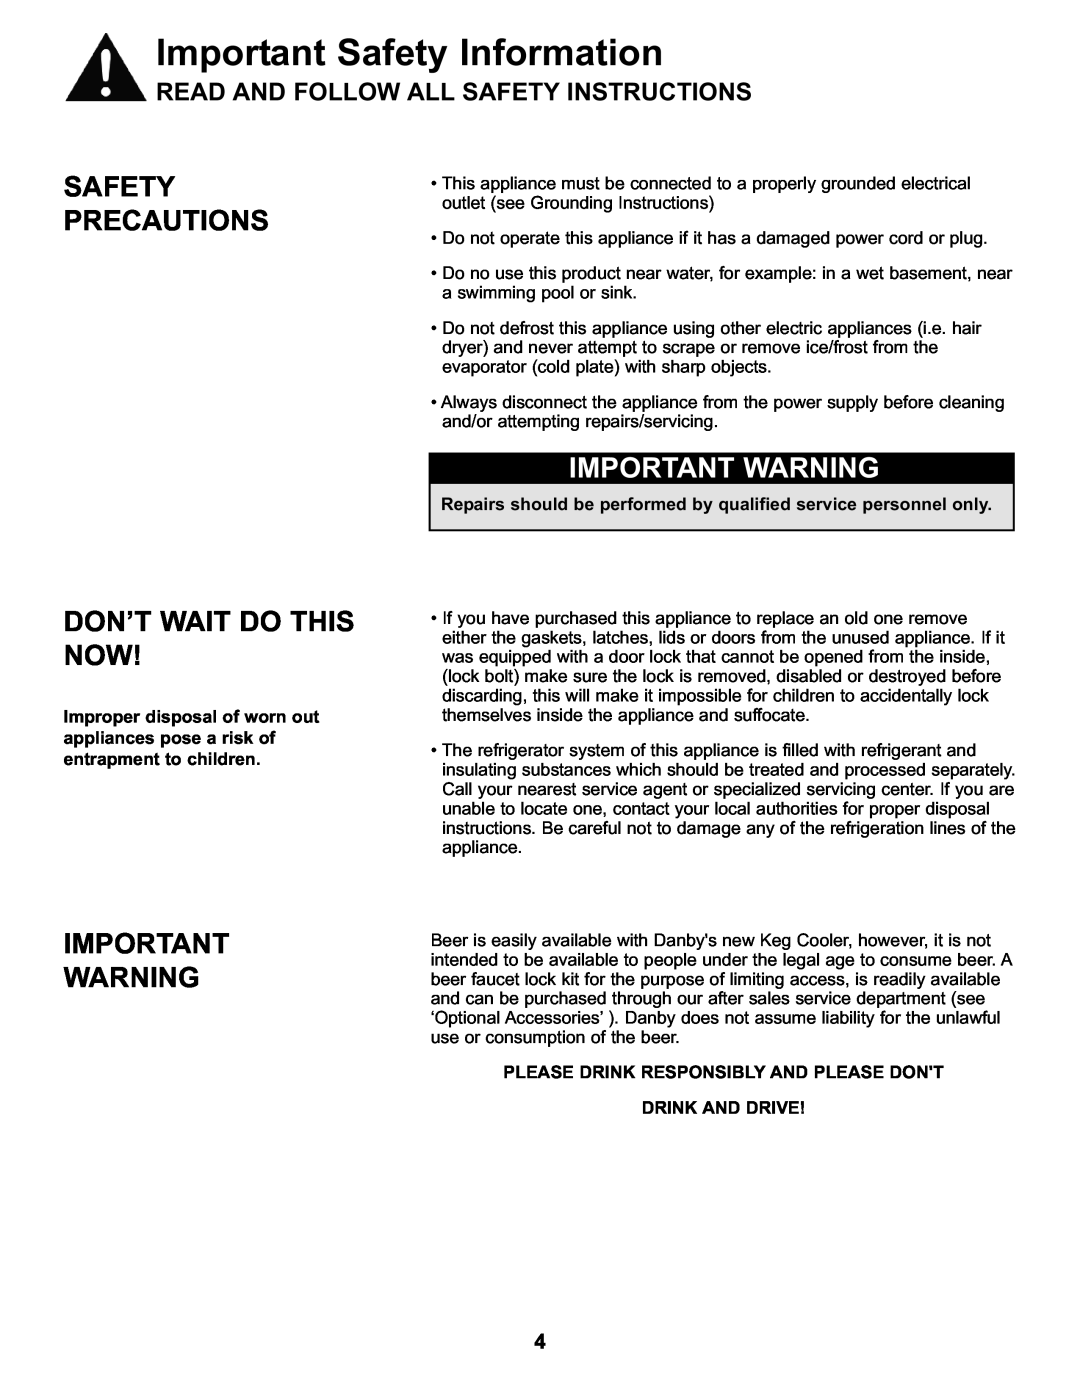 Danby DKC146SLDB manual Safety Precautions Don’T Wait Do This Now, Important Warning, Important Safety Information 